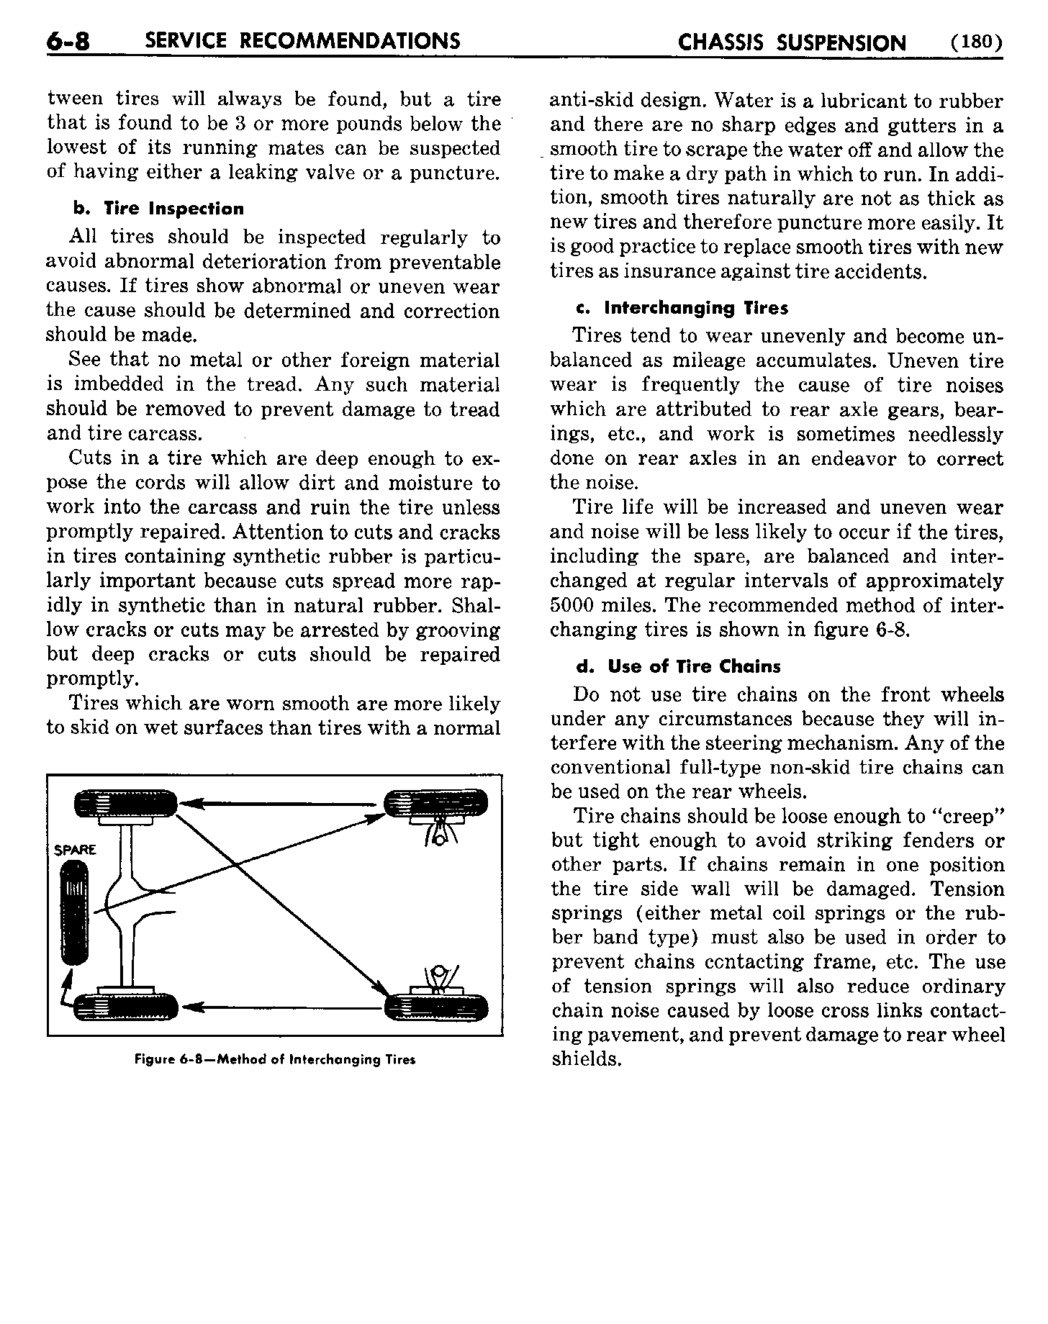 n_07 1950 Buick Shop Manual - Chassis Suspension-008-008.jpg